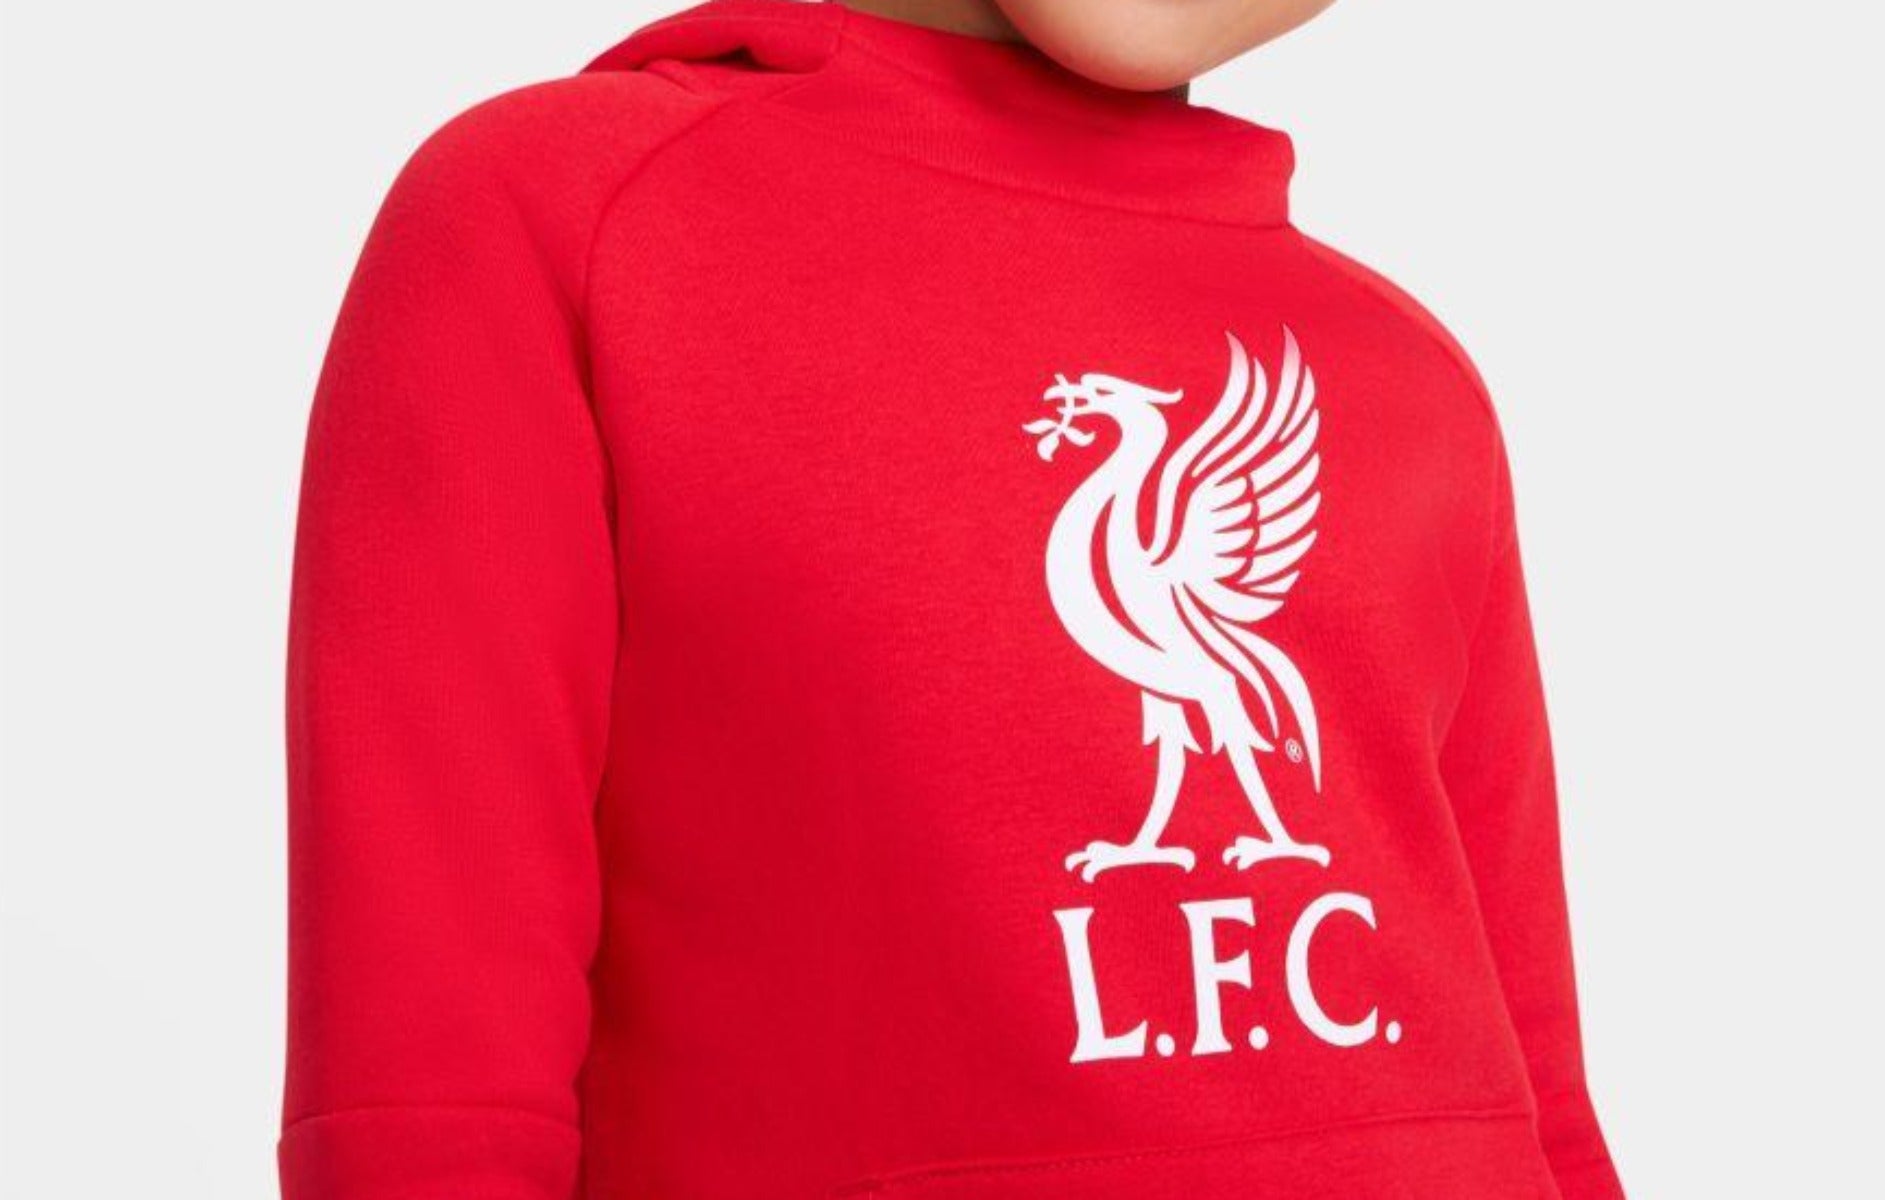 Nike Youth Liverpool F.C Fleece Pullover Soccer Hoodie-Red